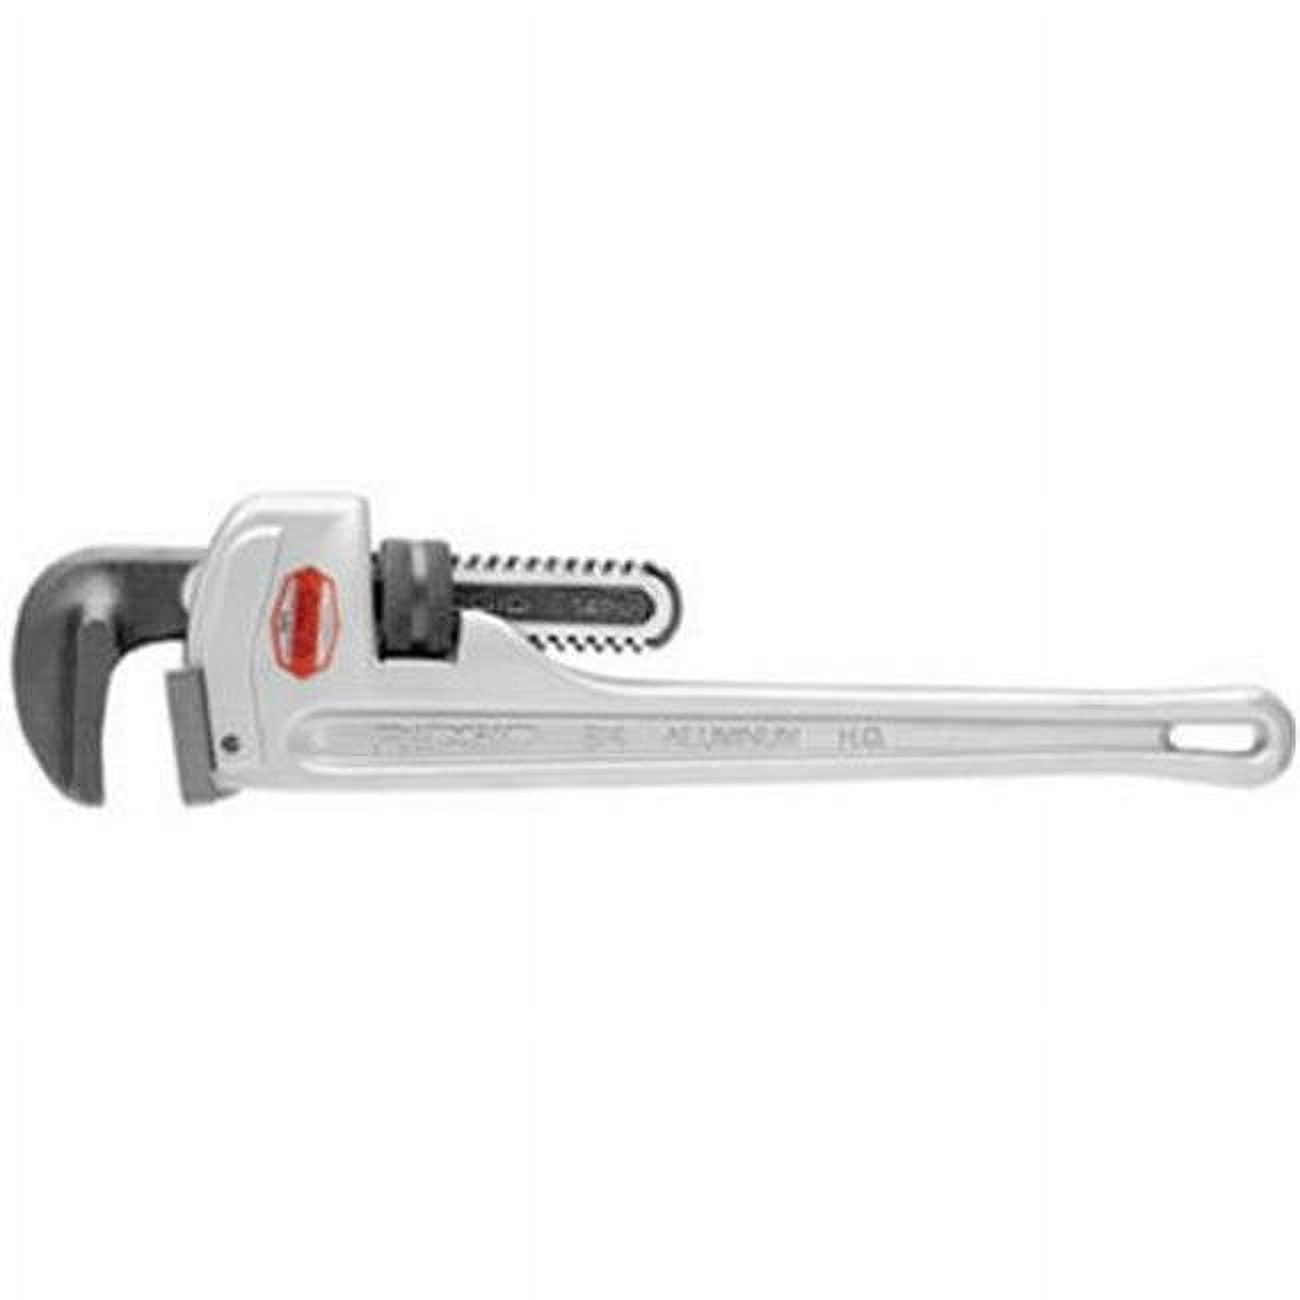 Aluminum Straight Pipe Wrench, 24 in. Plumbing Wrench -  Light House Beauty, LI1705724